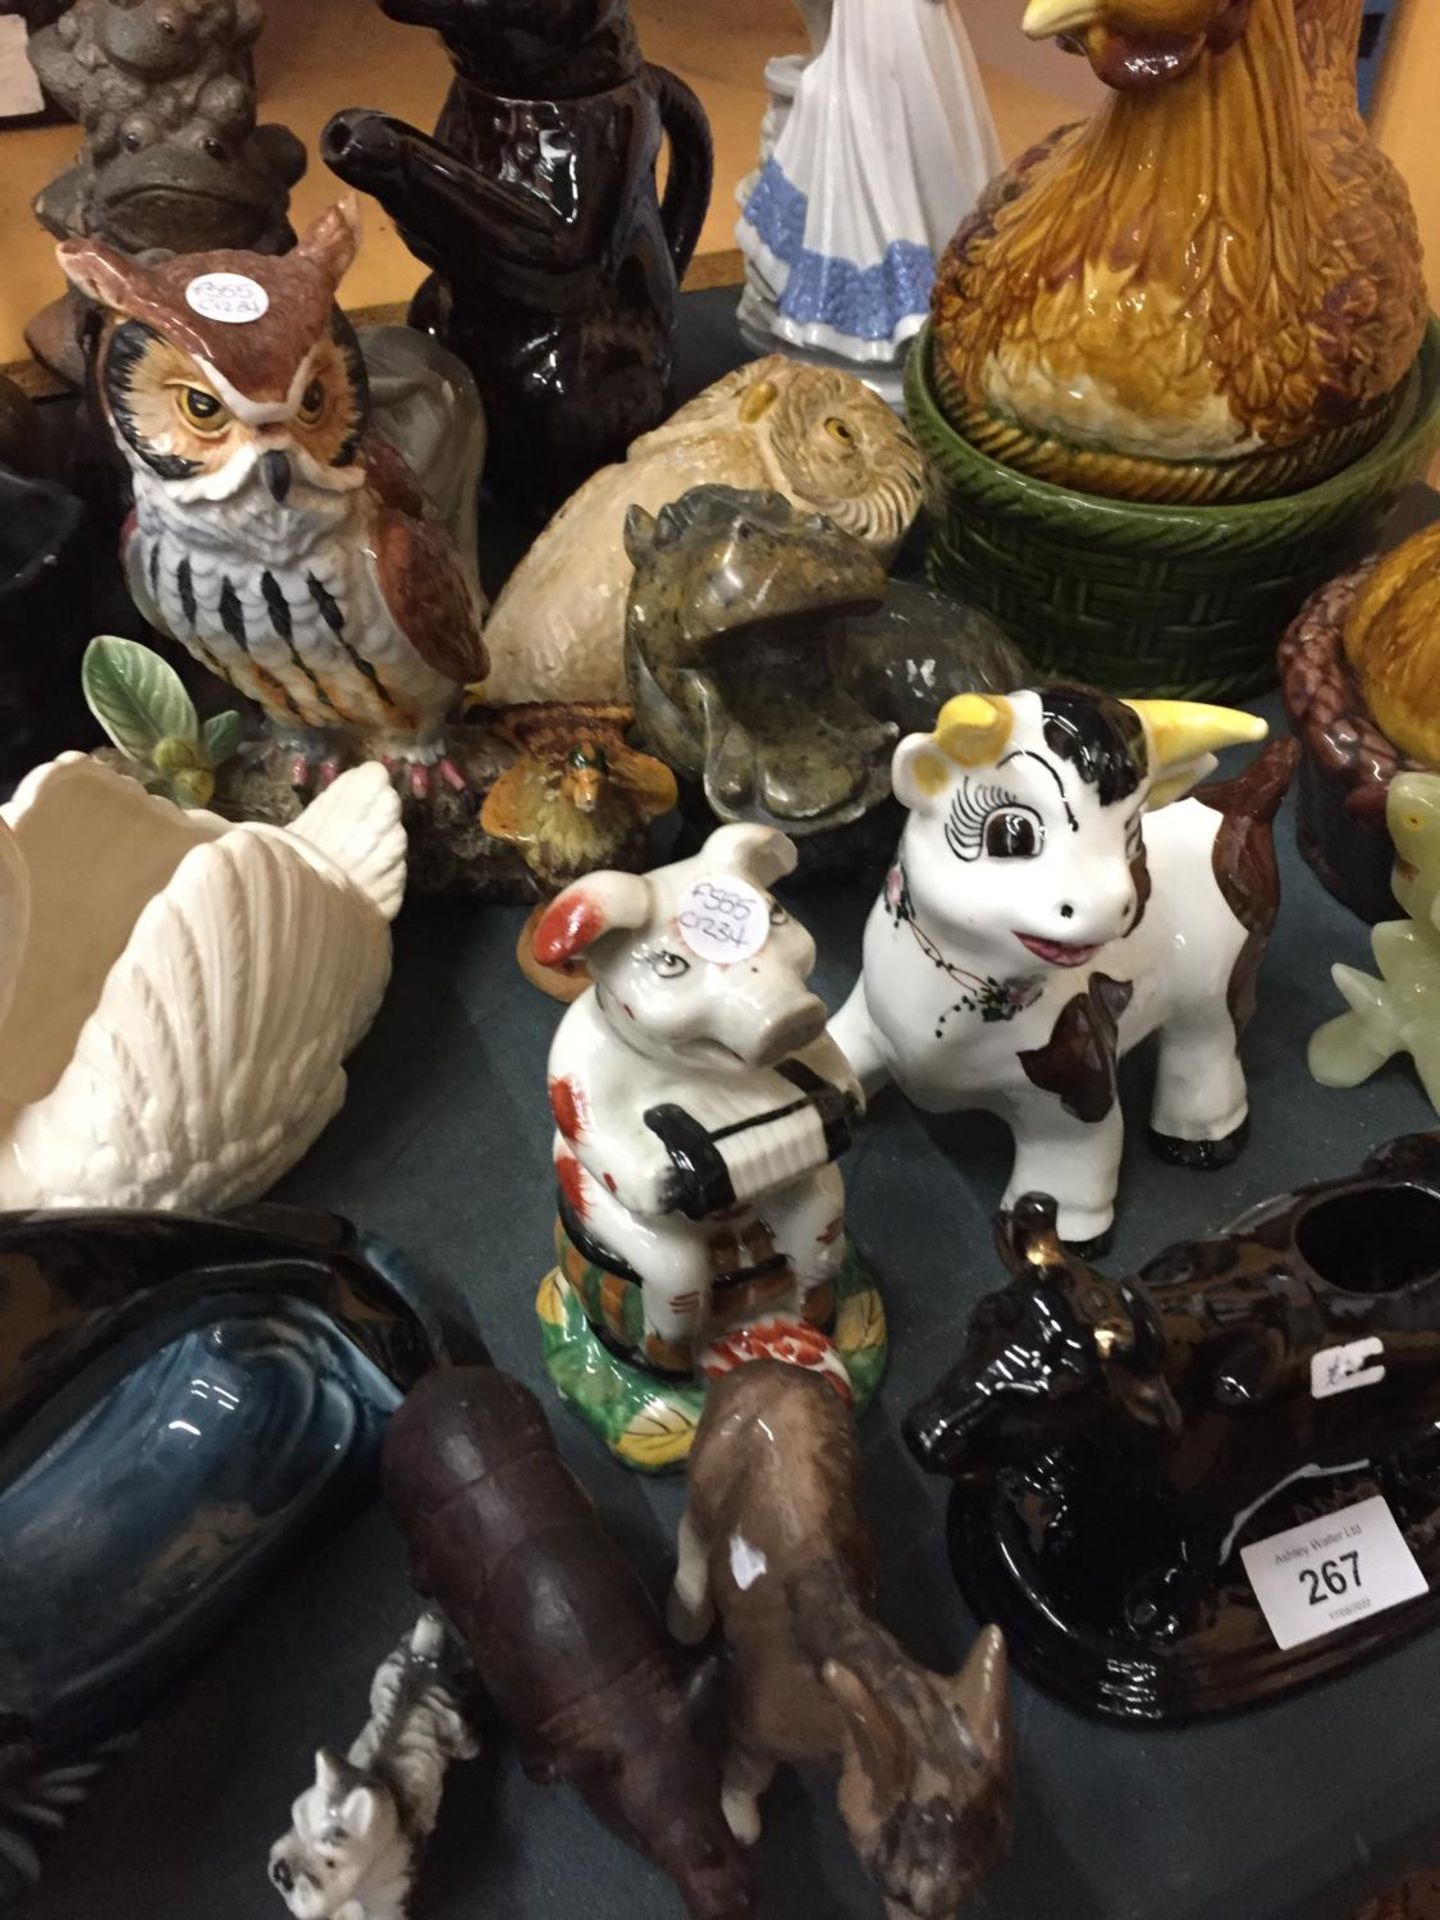 A QUANTITY OF CERAMIC ANIMALS TO INCLUDE HEN CROCKS, OWLS, COWS, PIGS, A POOLE DOLPHIN, ETC - Image 4 of 6